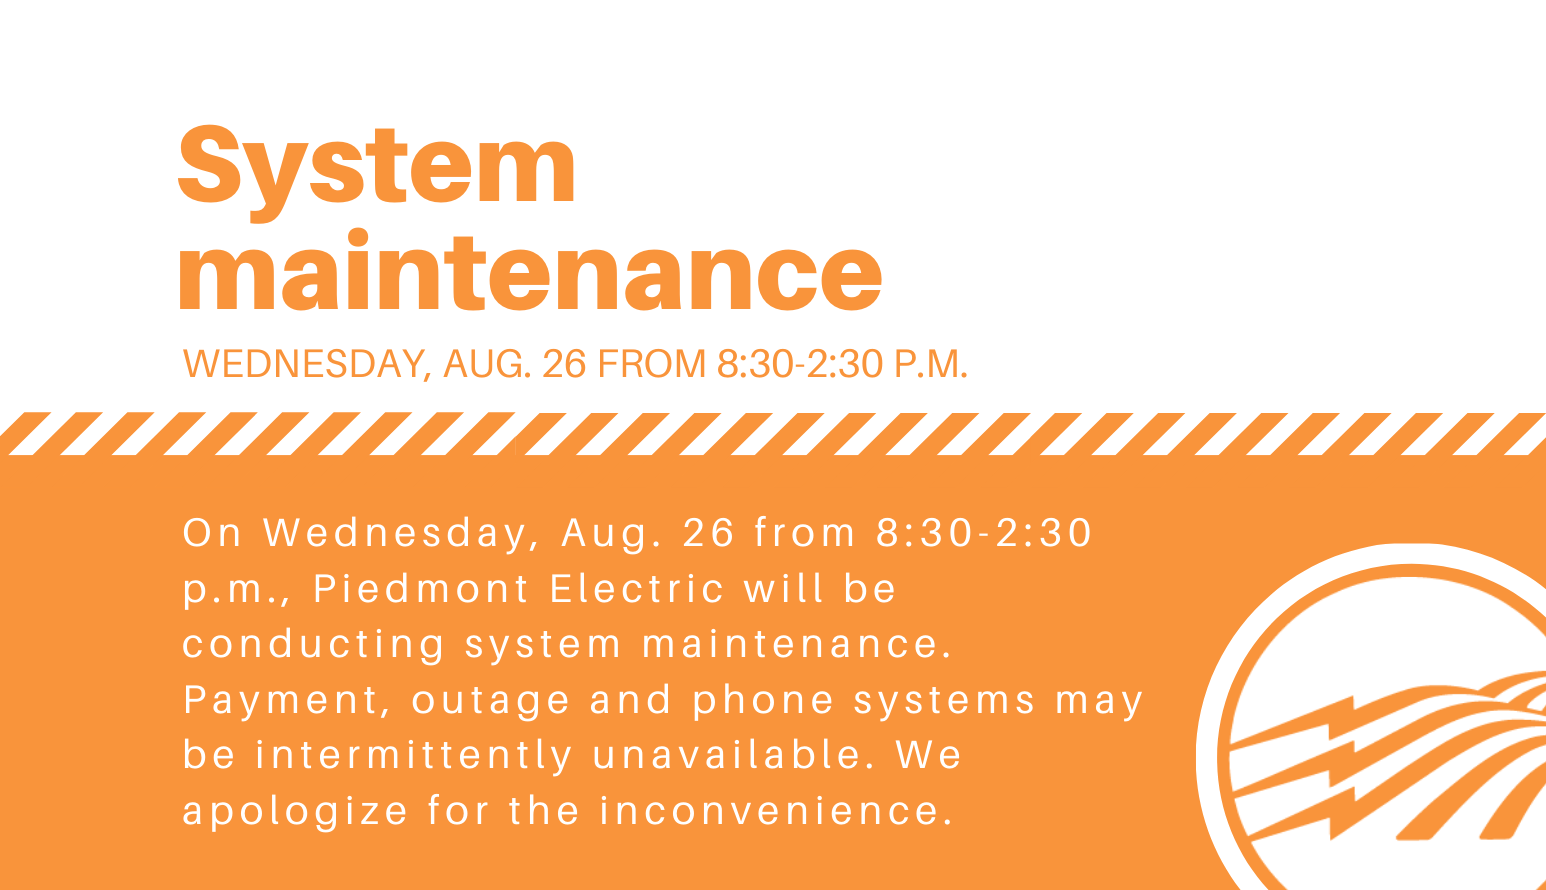 System maintenance. August 26 from 8:30 - 2:30 p.m. On Wednesday, August 26 from 8:30 - 2:30 p.m., Piedmont electric will be conducting system maintenance. Payment, outage and phone systems may be intermittently unavailable. We apologize for the inconvenience.